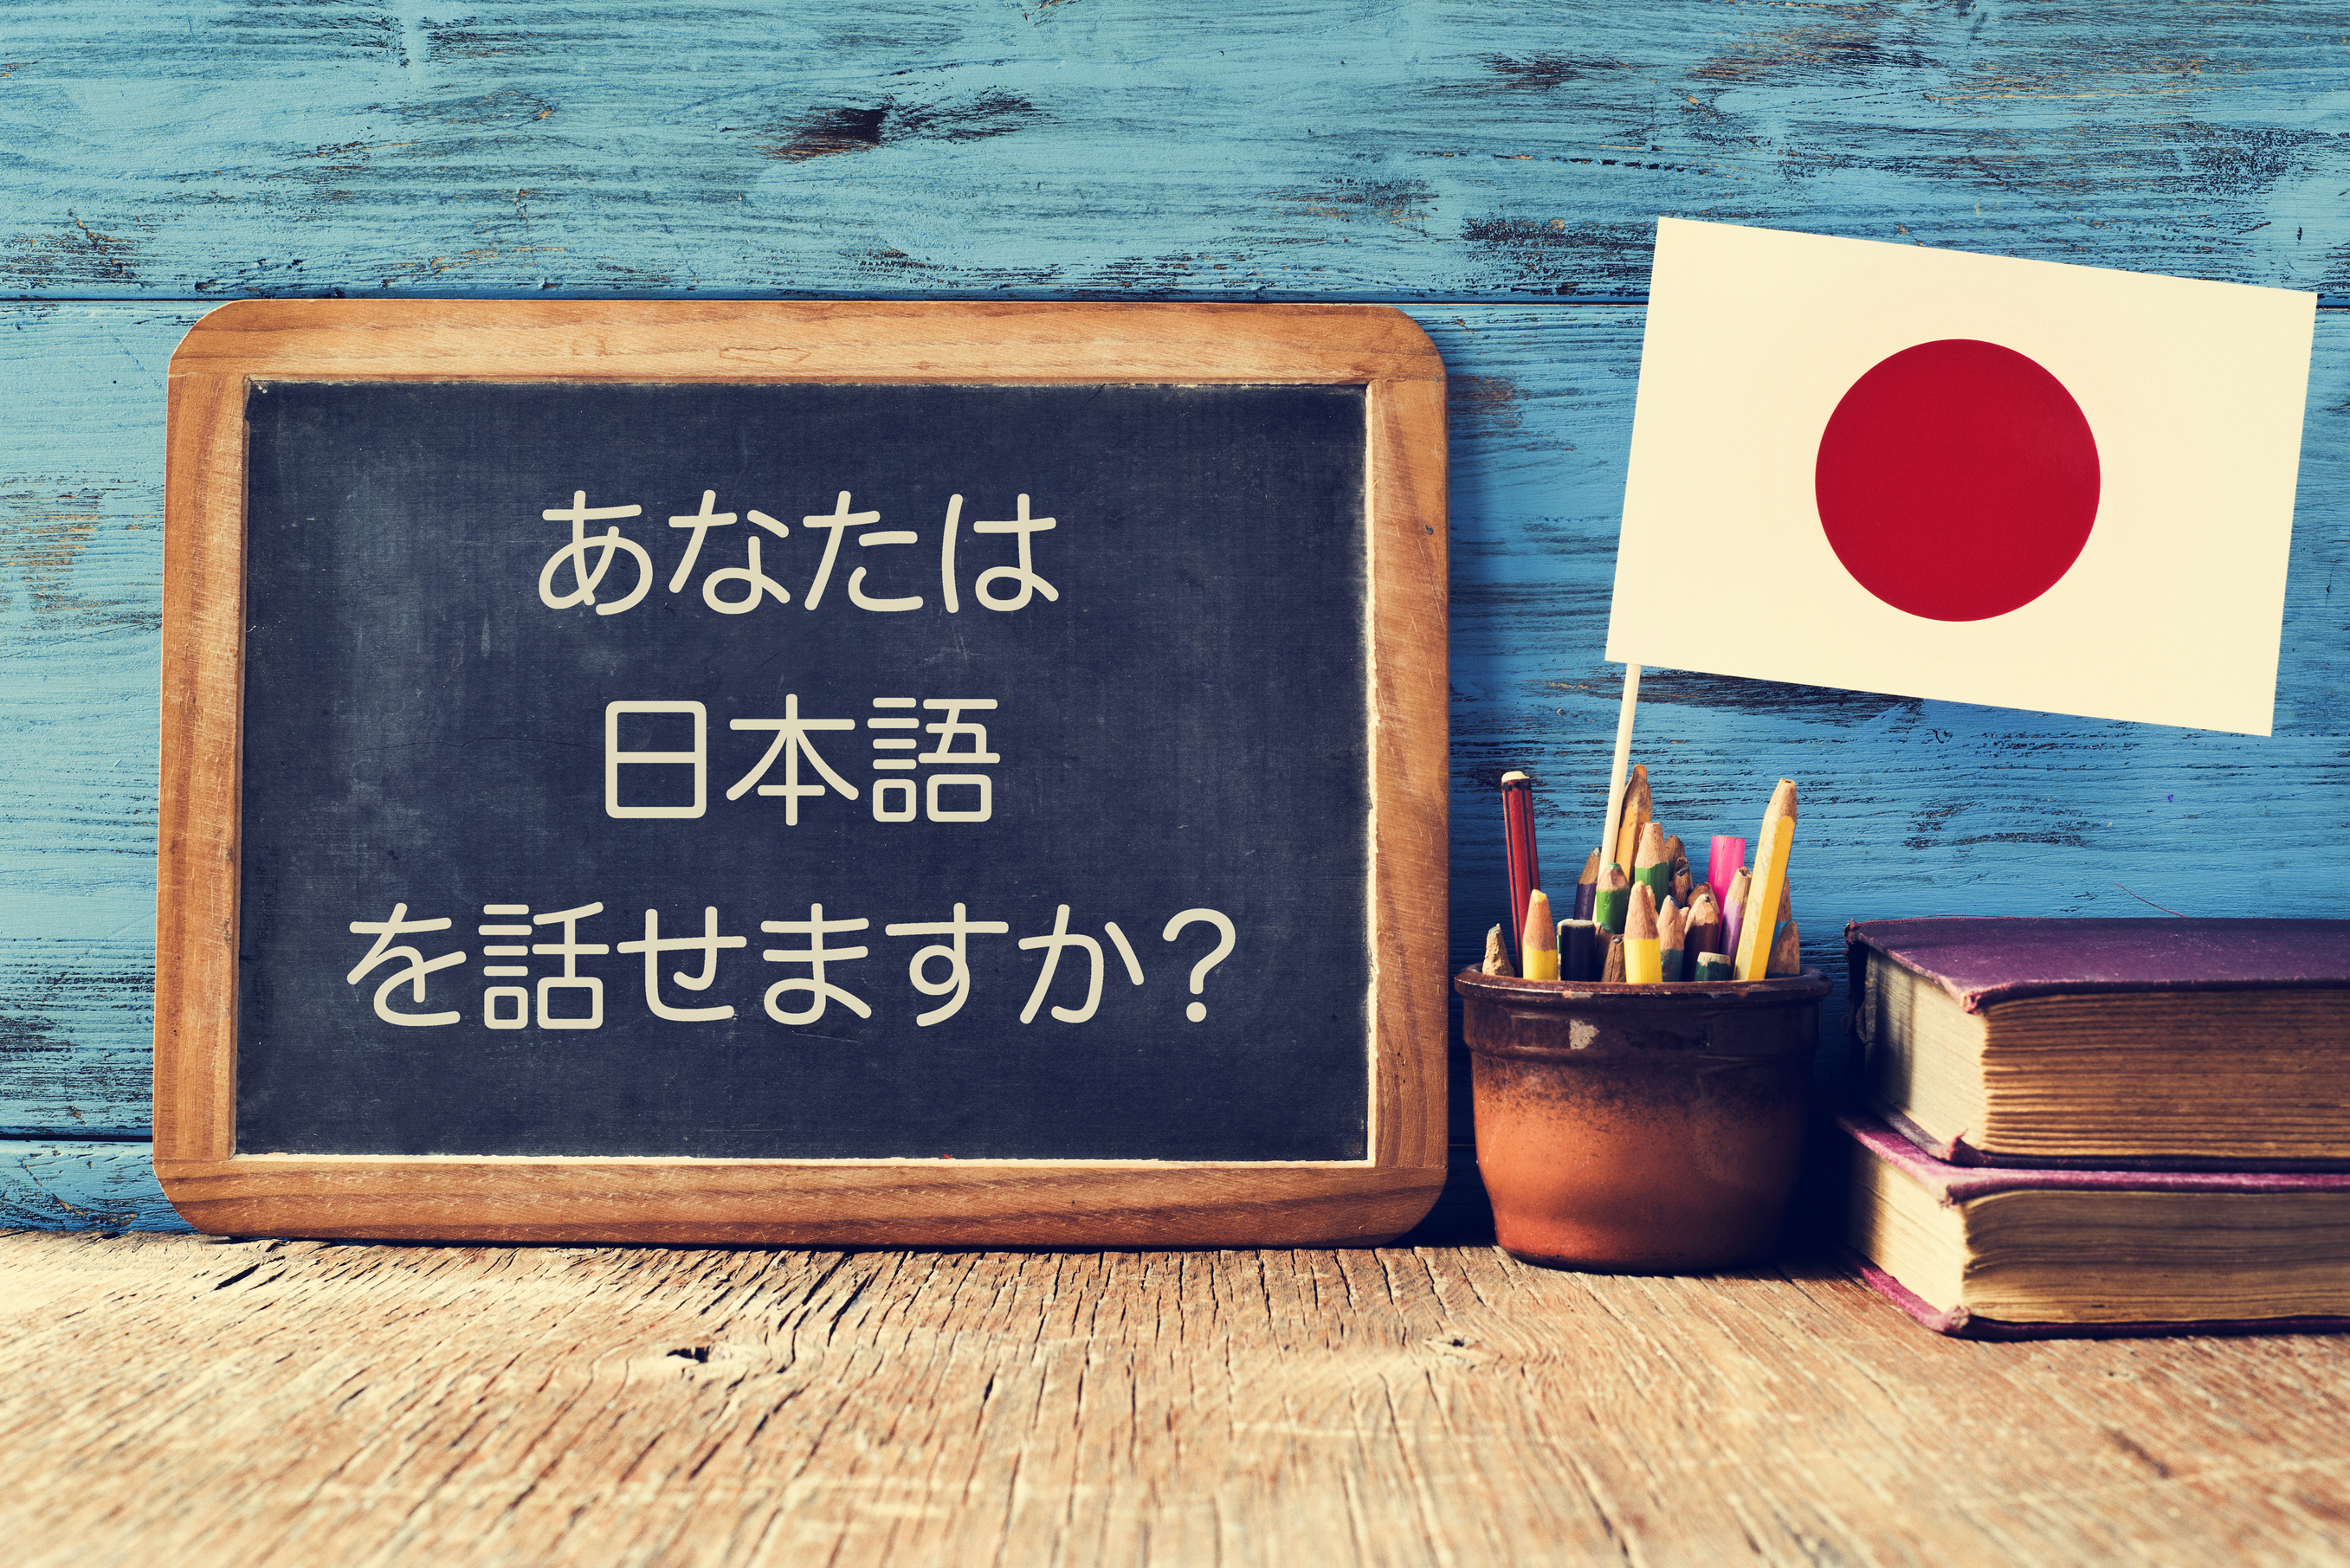 Advertising giant Dentsu says that Japanese people should speak a simplified version of the country's native language to overseas tourists. | ISTOCK